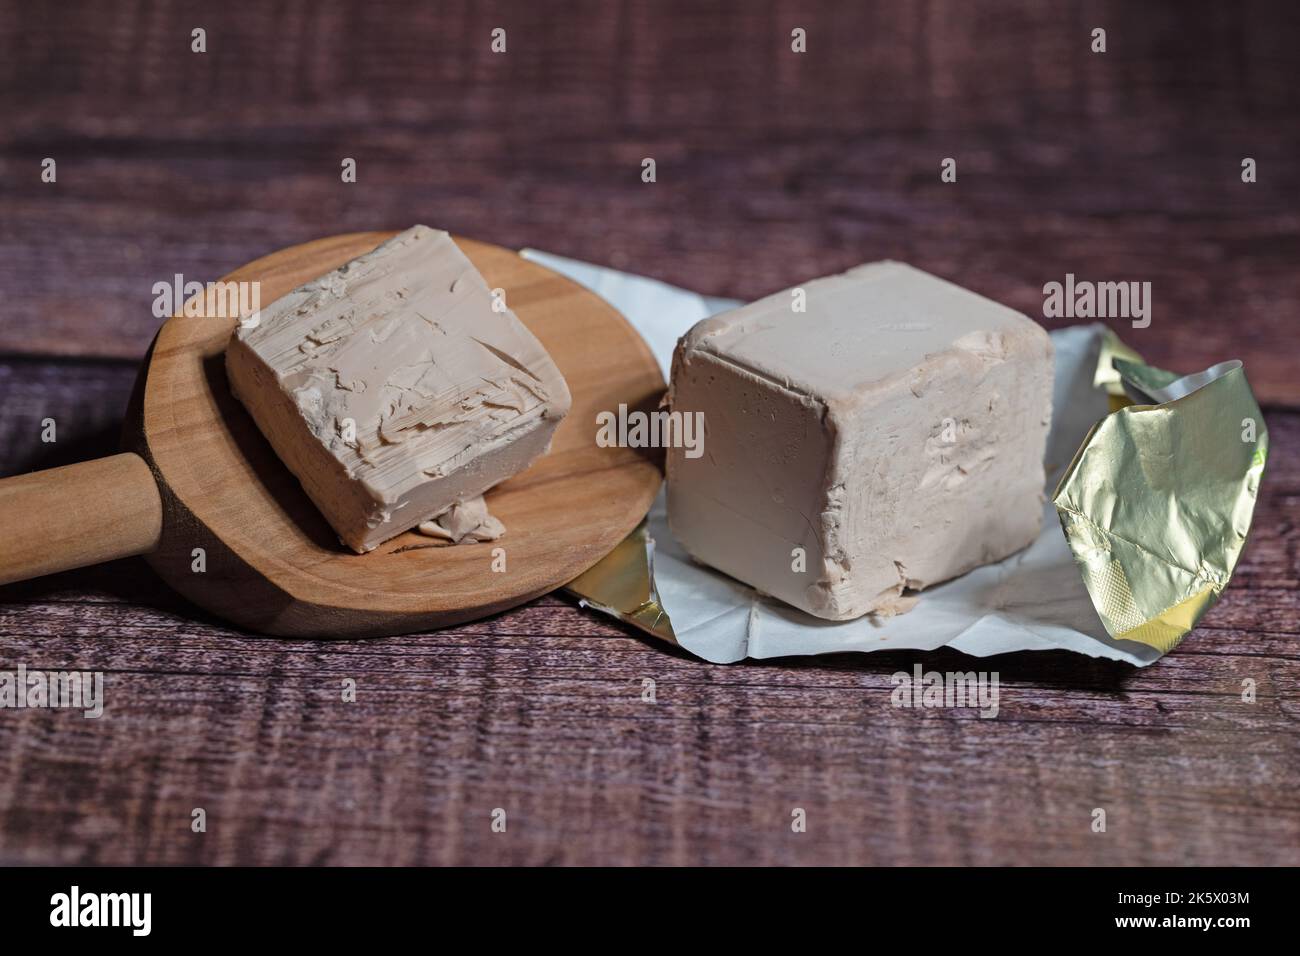 Baker's yeast on a wooden spoon in a closeup Stock Photo